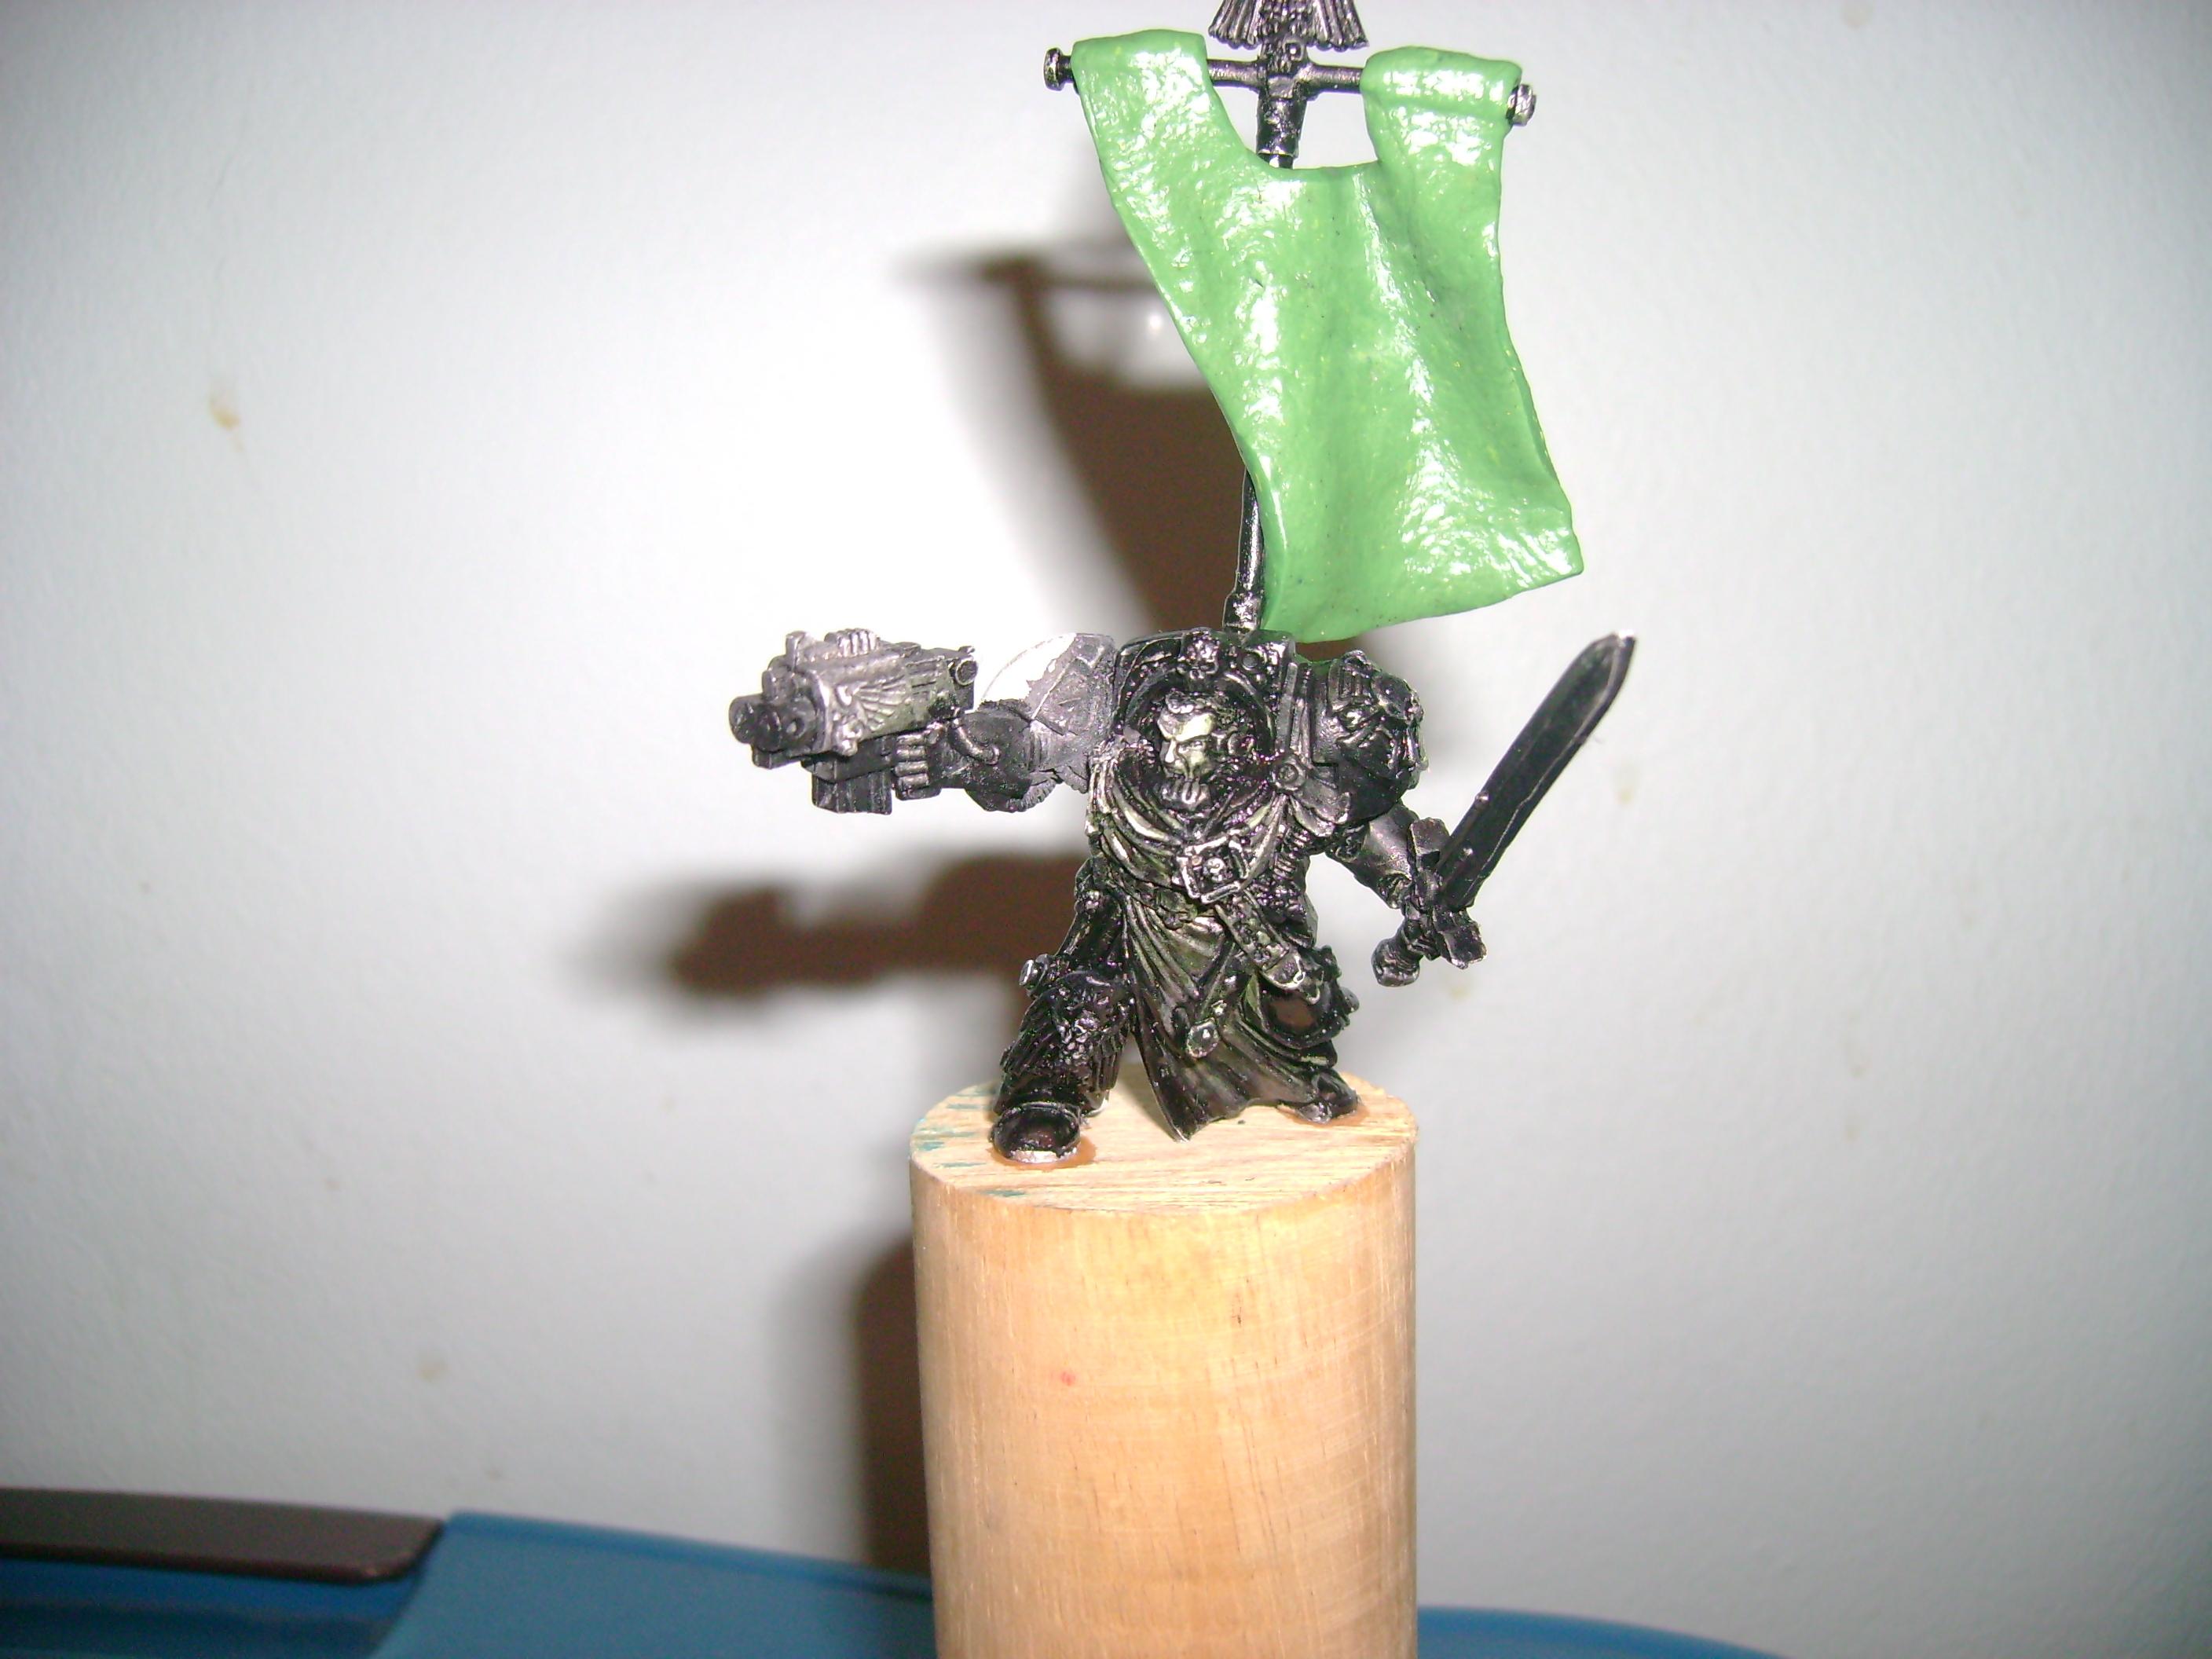 Greenstuff, Painting And Modeling, Space Marines, Warhammer 40,000, Work In Progress